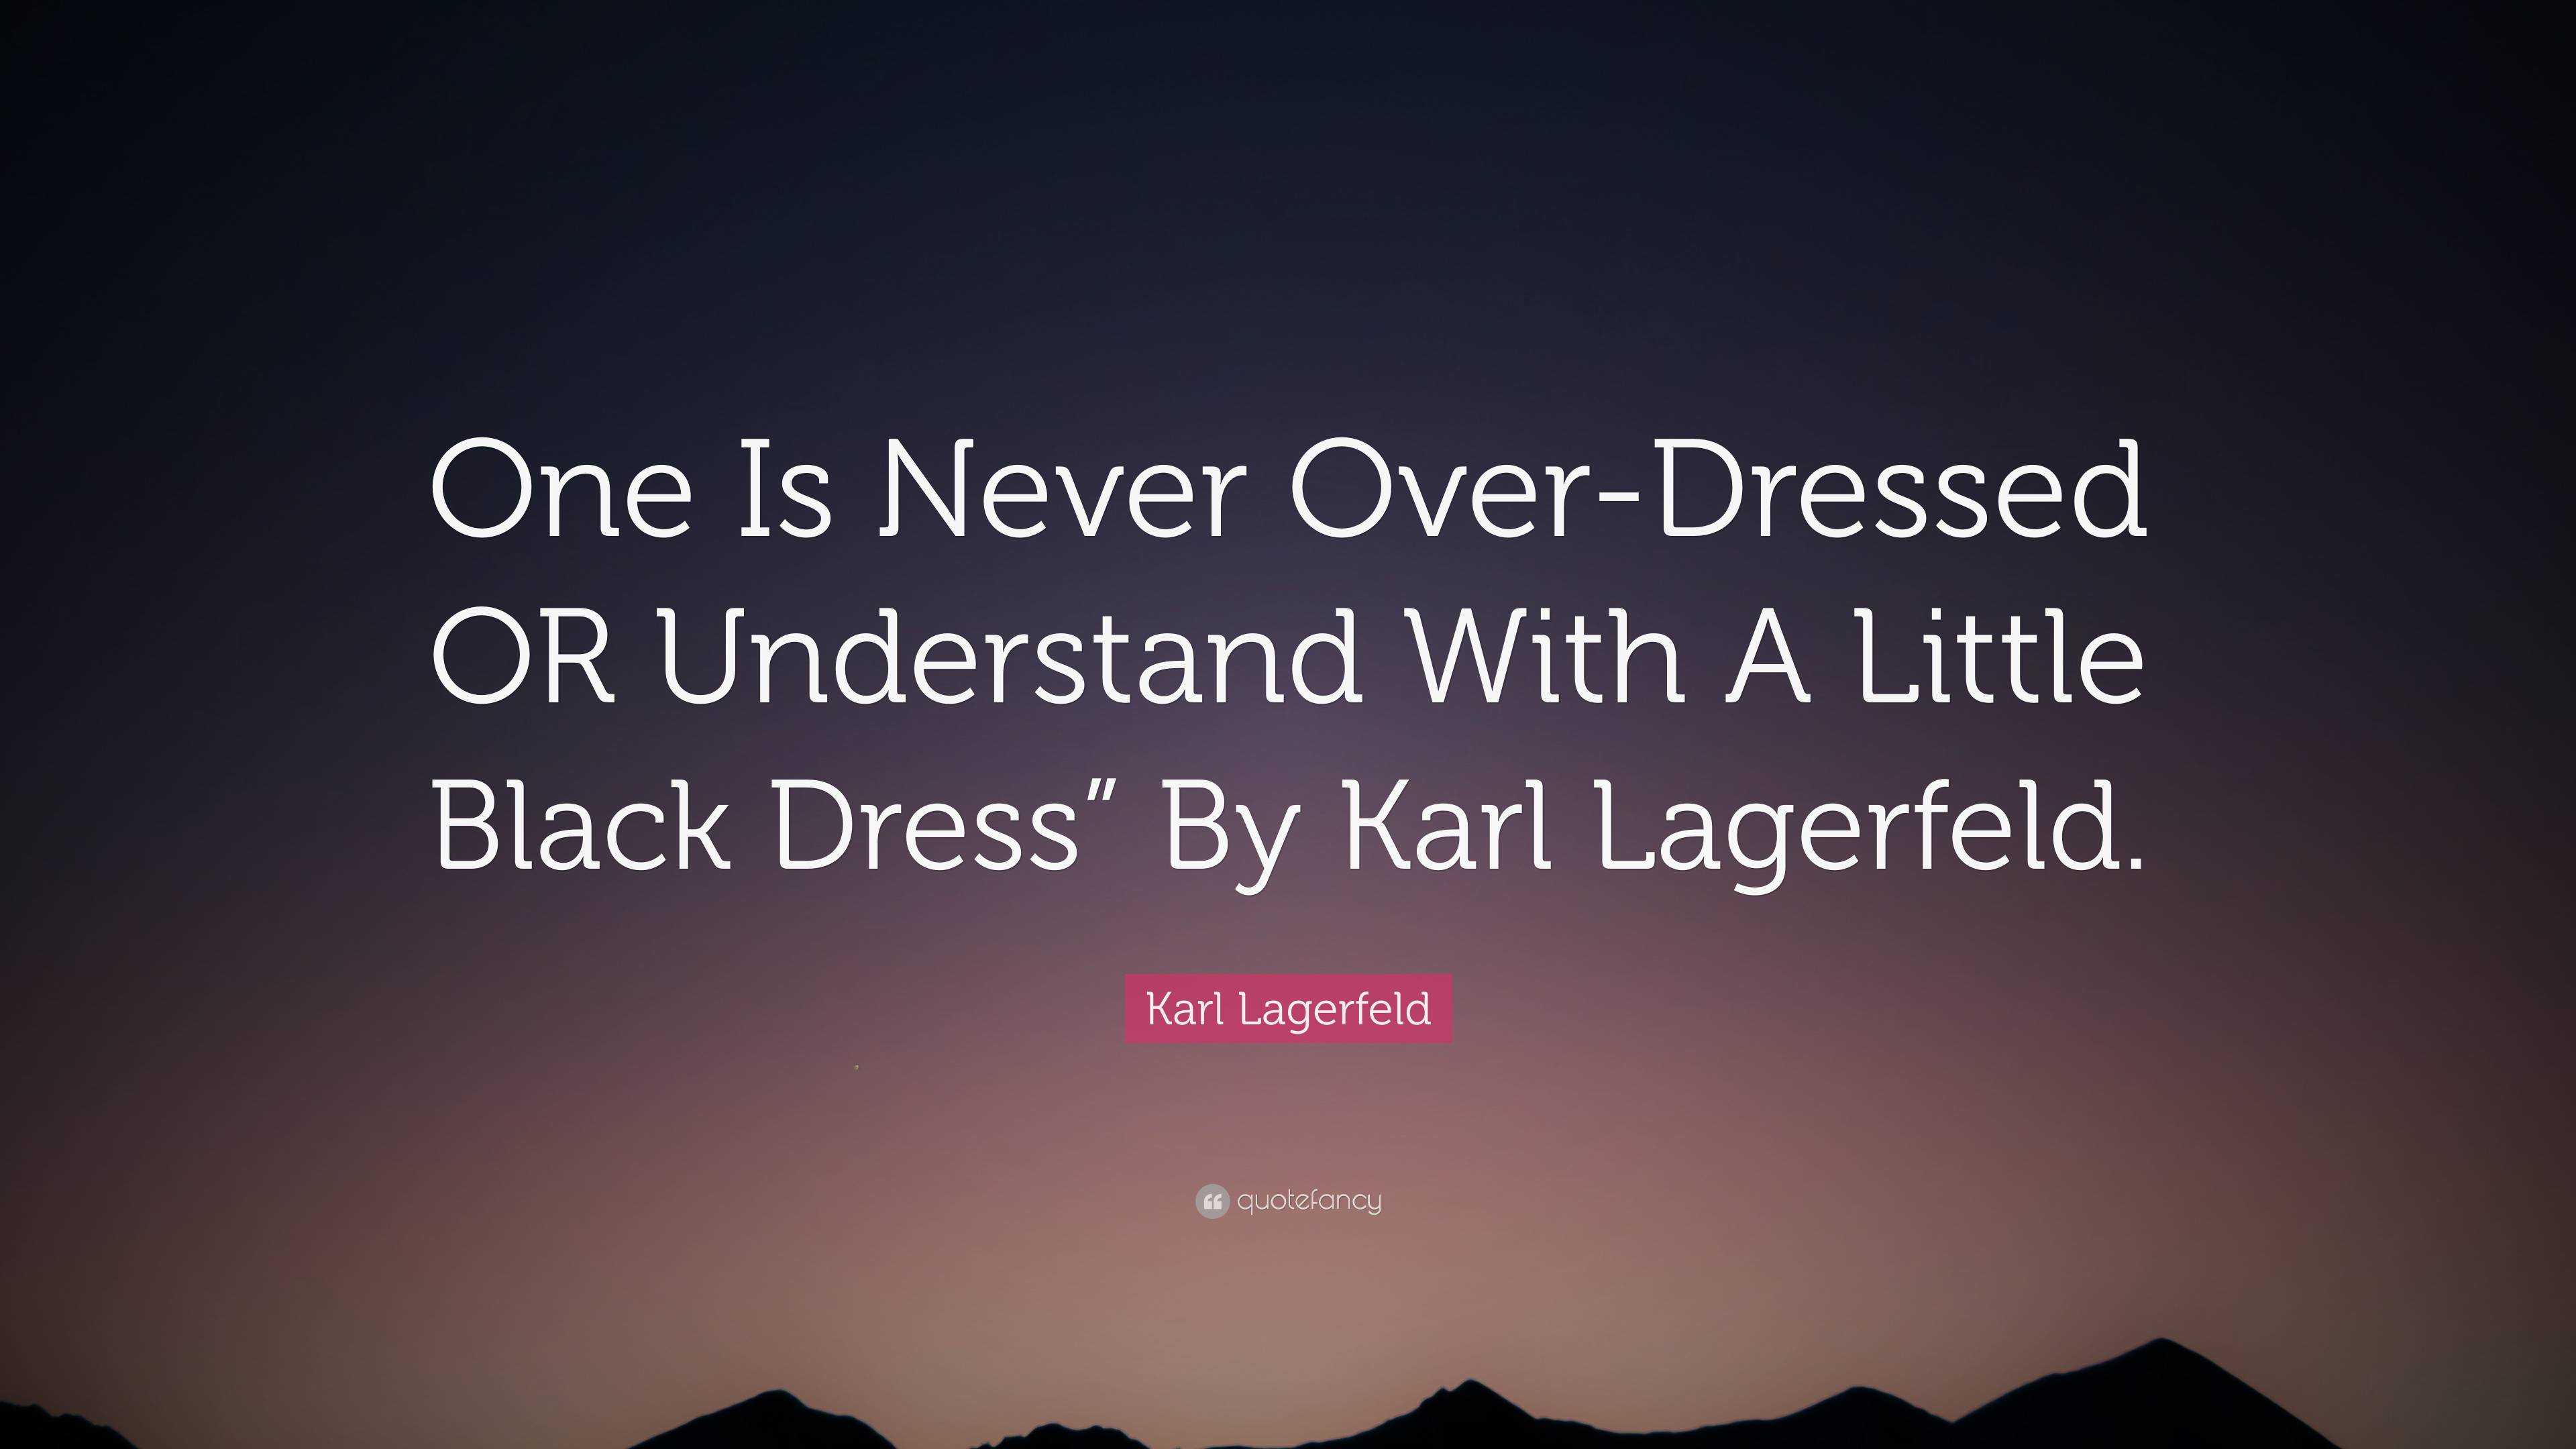 Karl Lagerfeld Quote: “One Is Never Over-Dressed Or Understand With A Little Black Dress” By